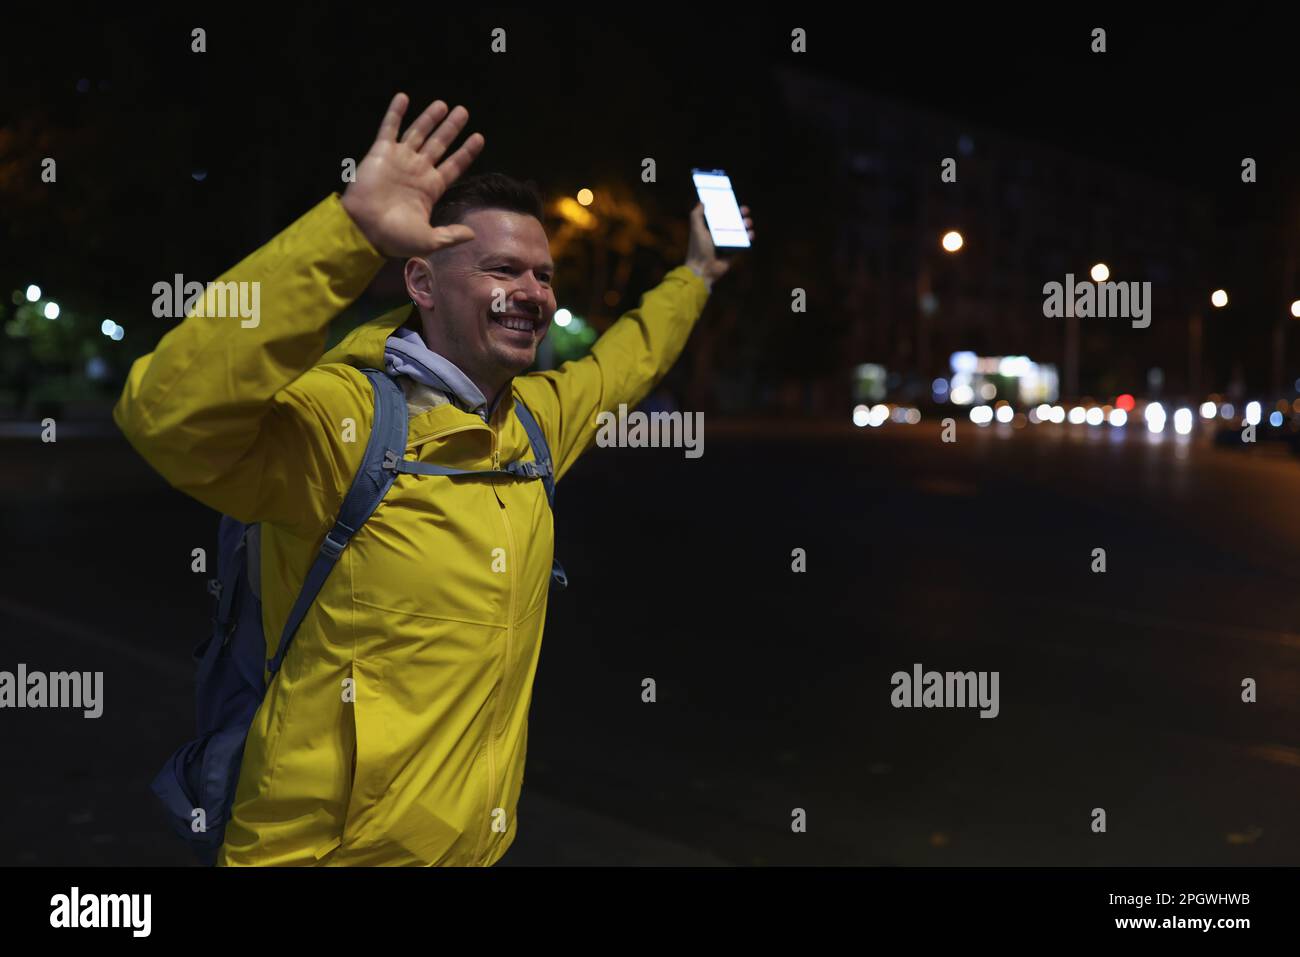 Joyful tourist with cell phone greets friends in night city Stock Photo